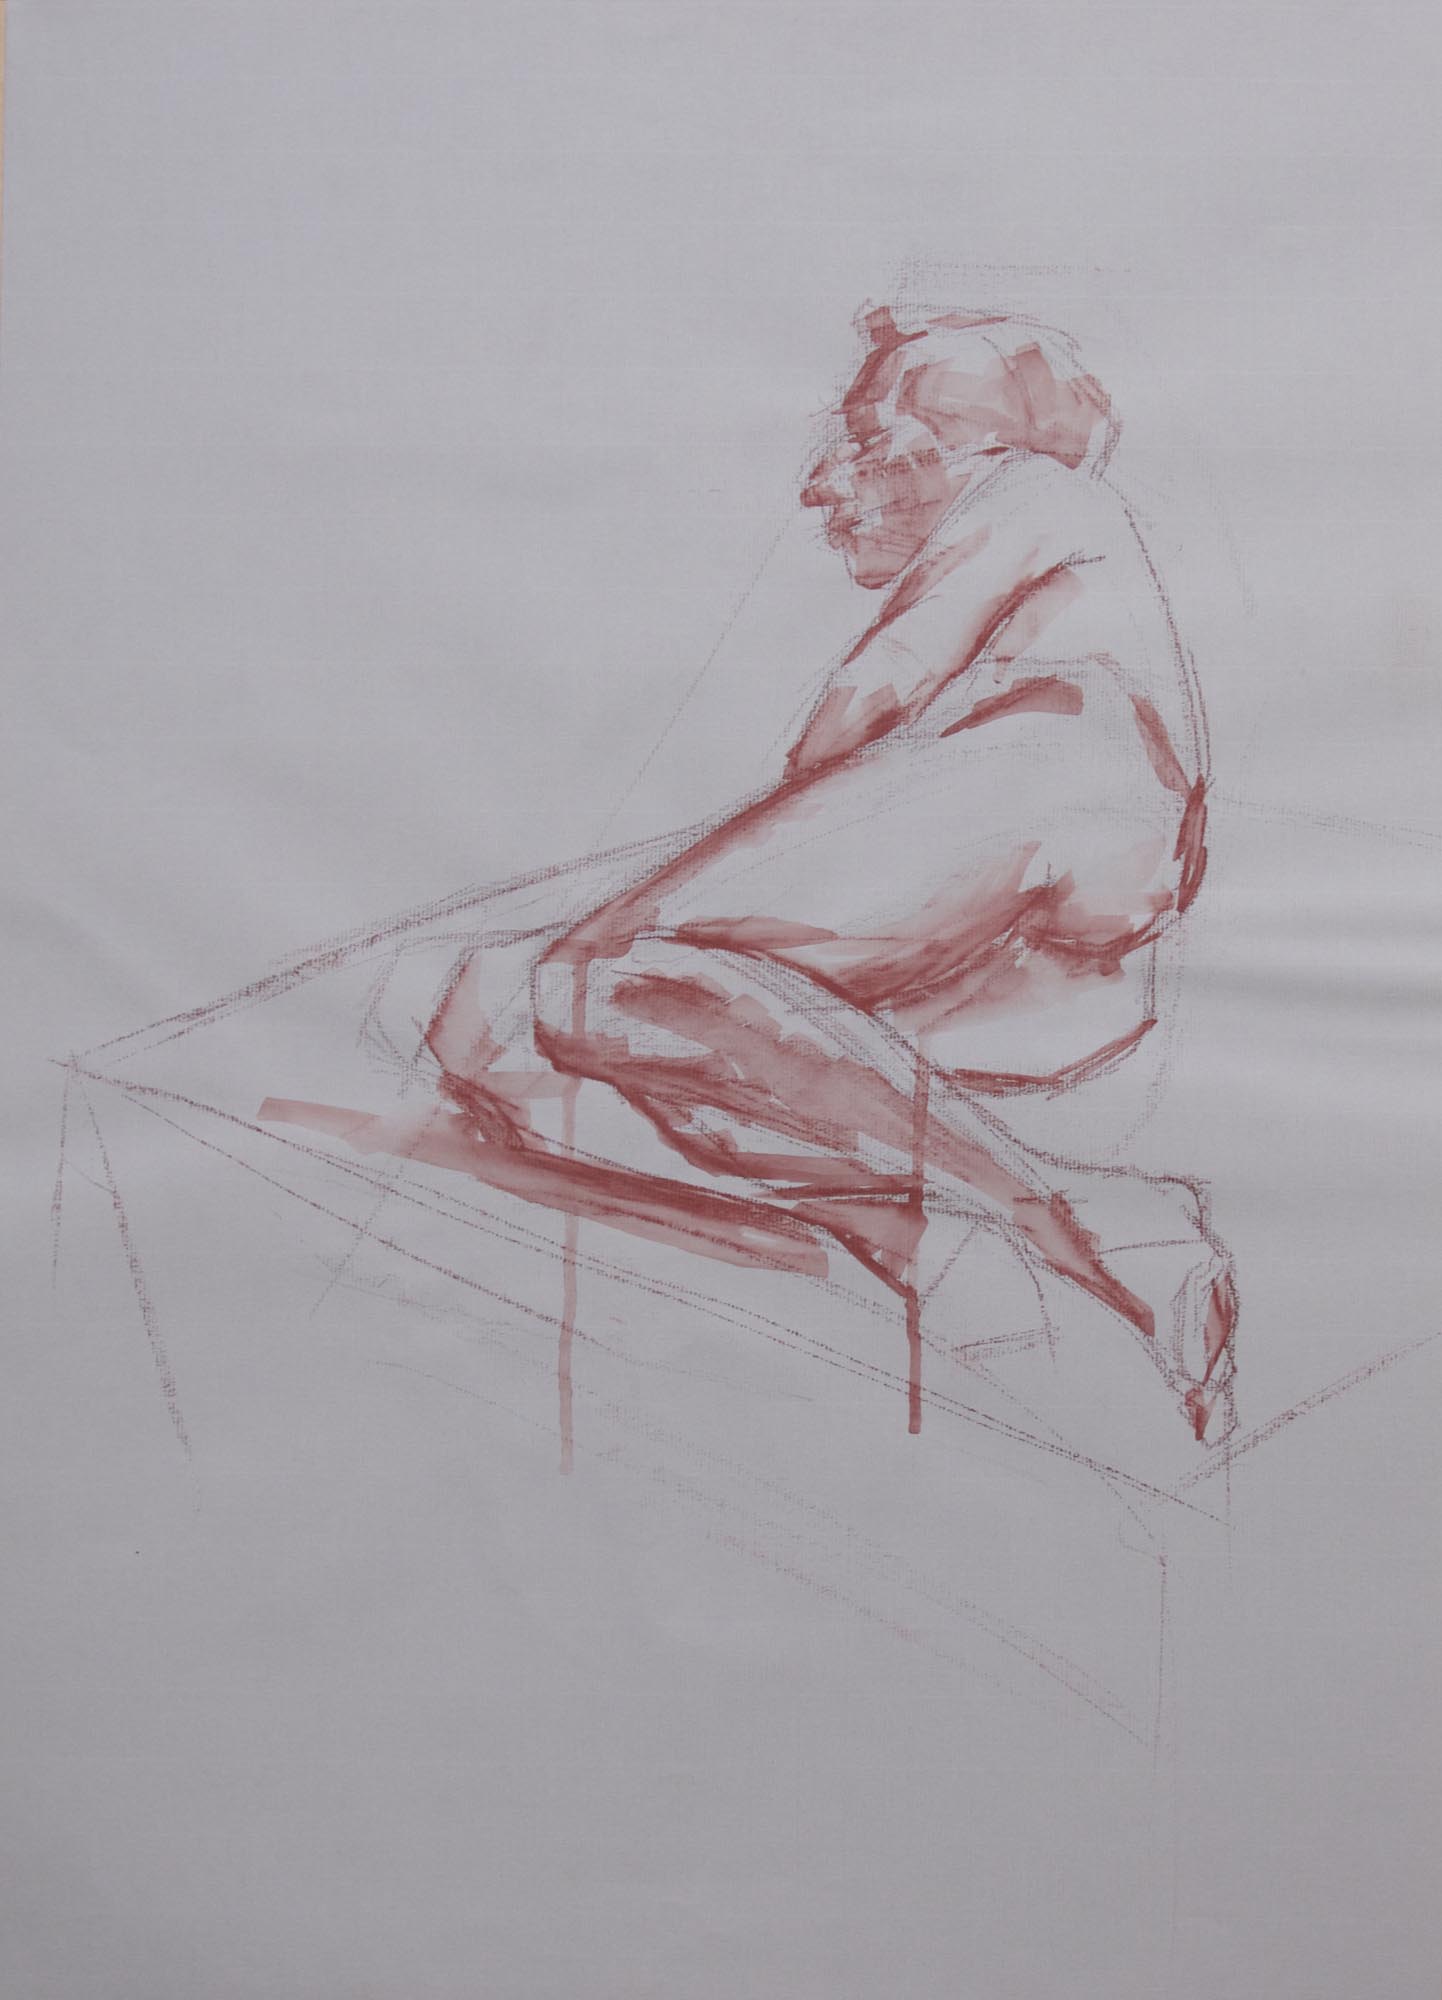 Male nude reclining | Art Graf compressed pigment on Ingres paper, 70cm x 50cm